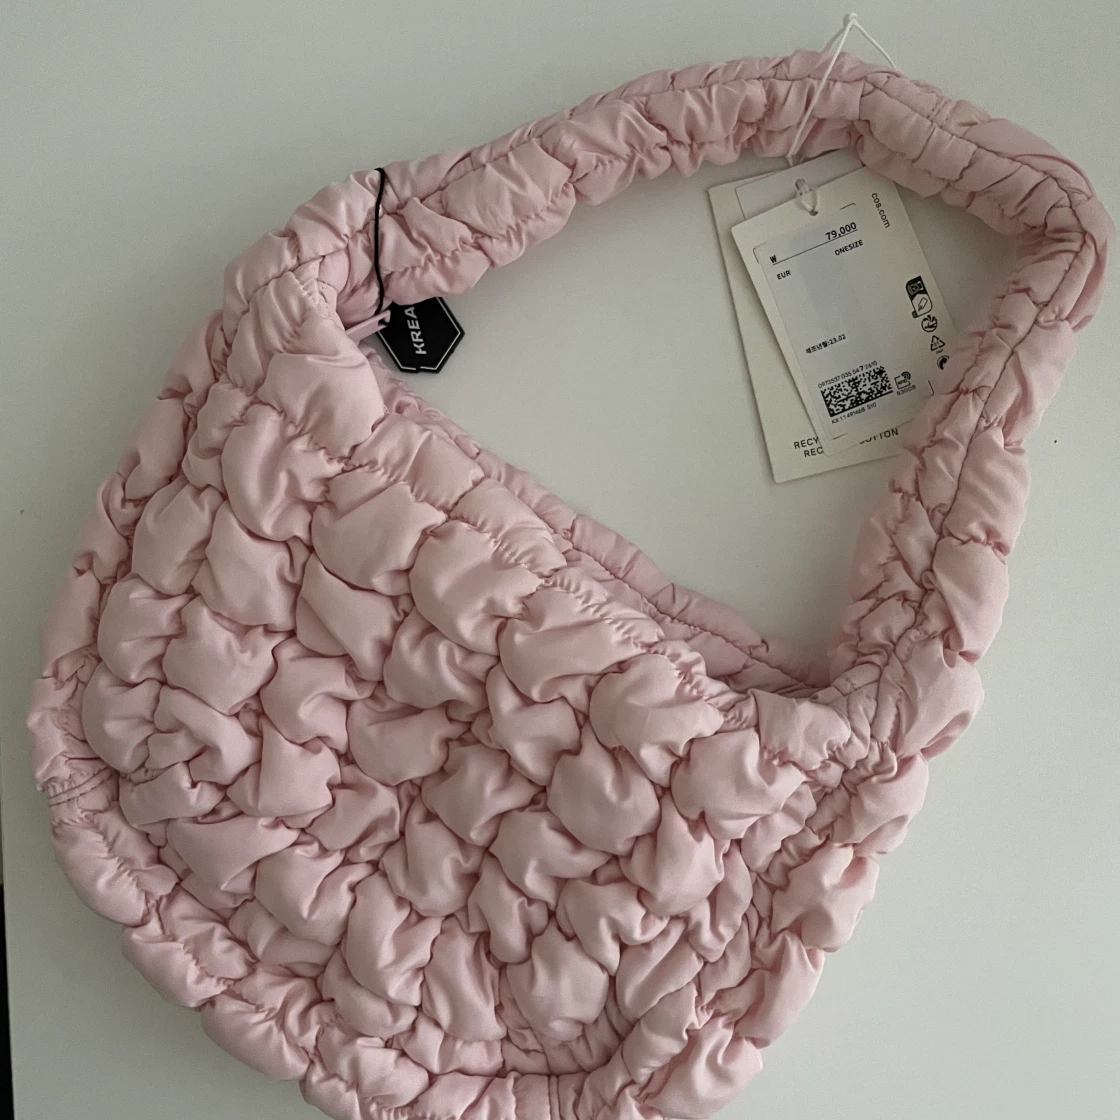 COS Quilted Mini Bag Pink